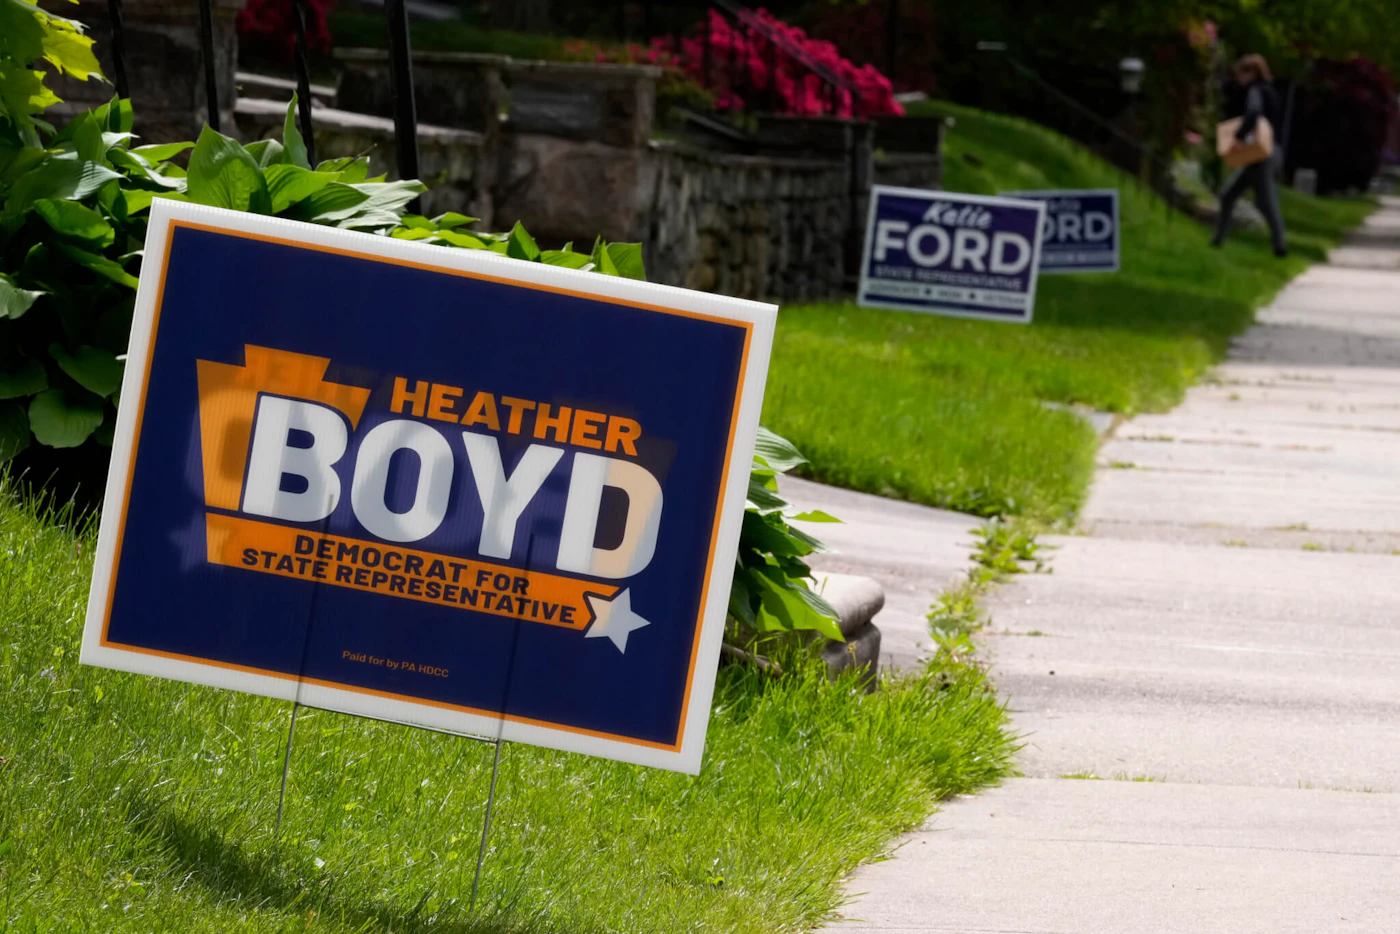 Campaign signs for Heather Boyd and Katie Ford are seen, Thursday, May 4, 2023, in Aldan, Pa. The two are running in a special election in the Philadelphia suburbs that will determine whether Democrats in the Pennsylvania House of Representatives will maintain control of the chamber or if Republicans will reclaim the majority control they held for 12 years until this January. (AP Photo/Matt Slocum)